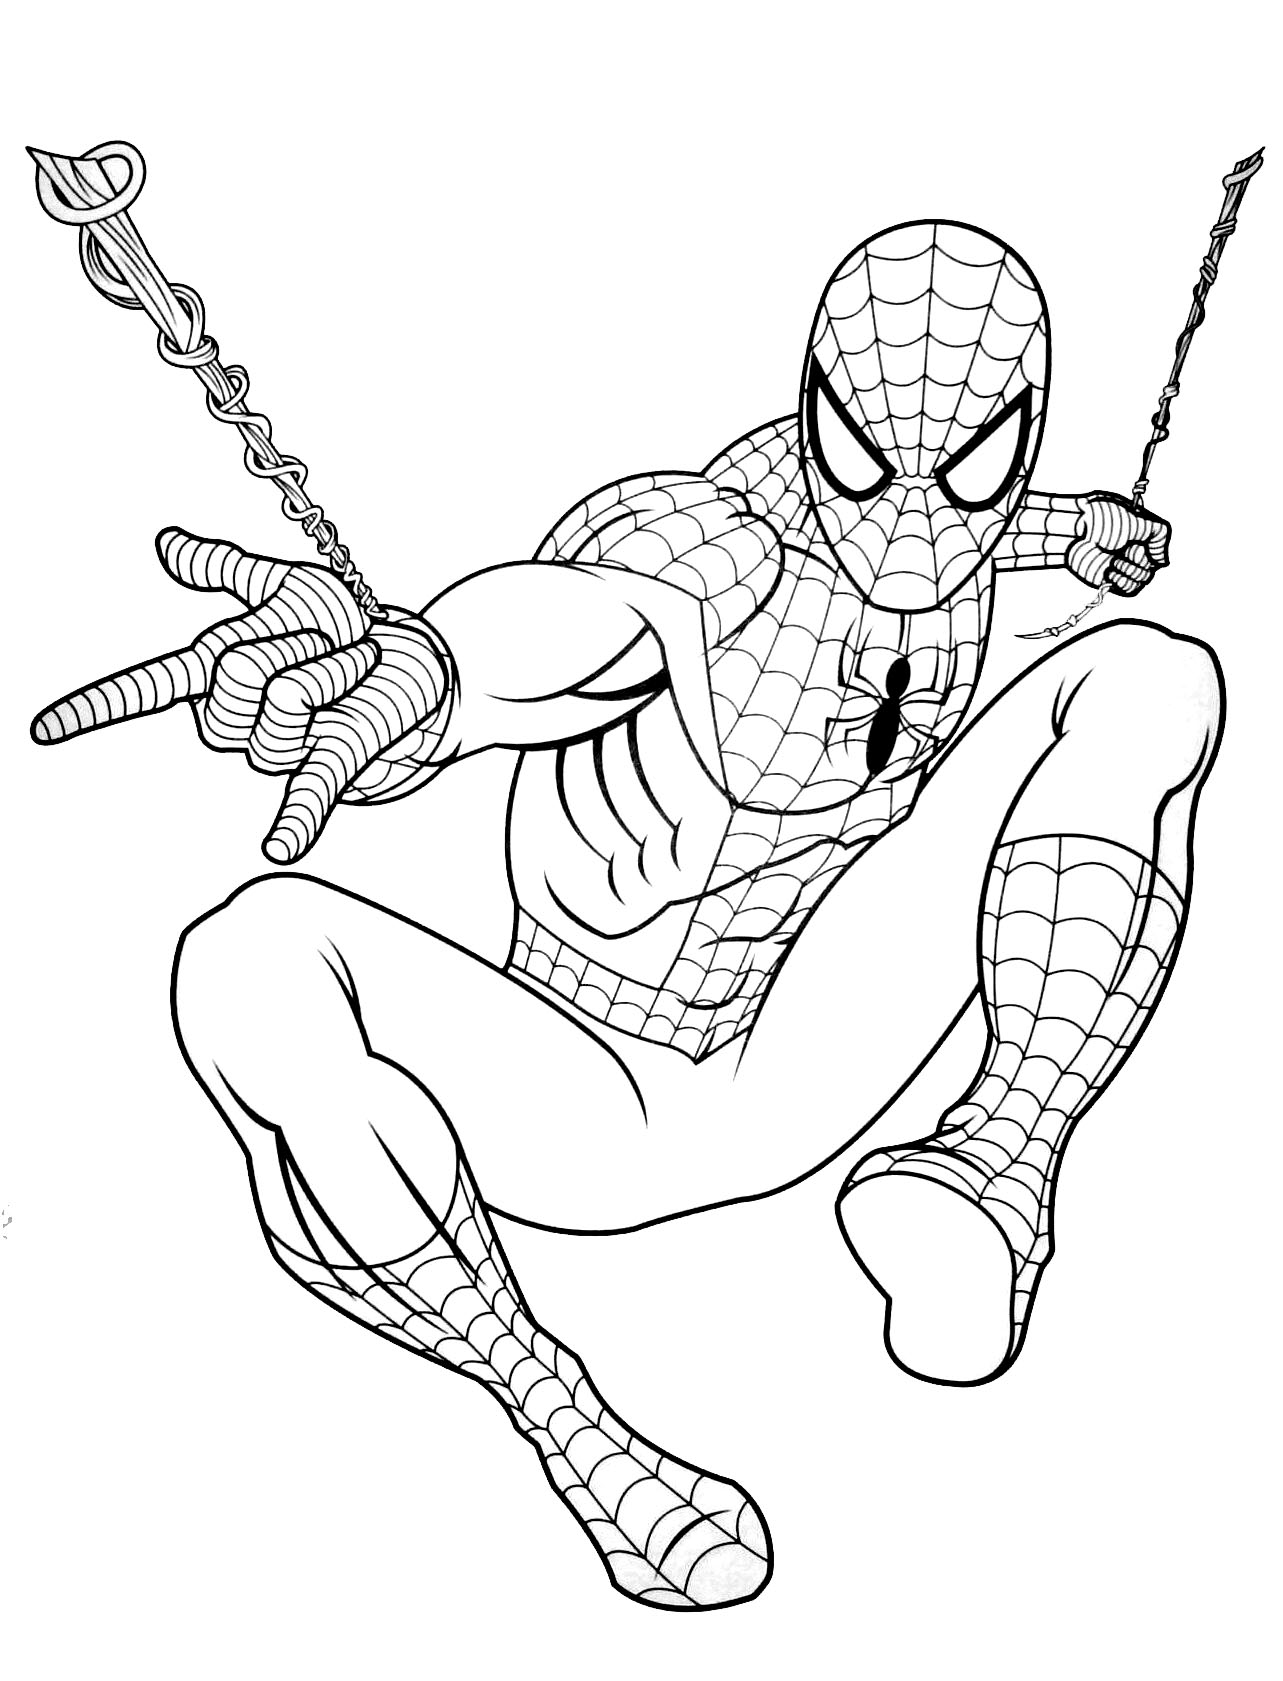 Free Spiderman drawing to print and color - Spiderman Kids Coloring Pages